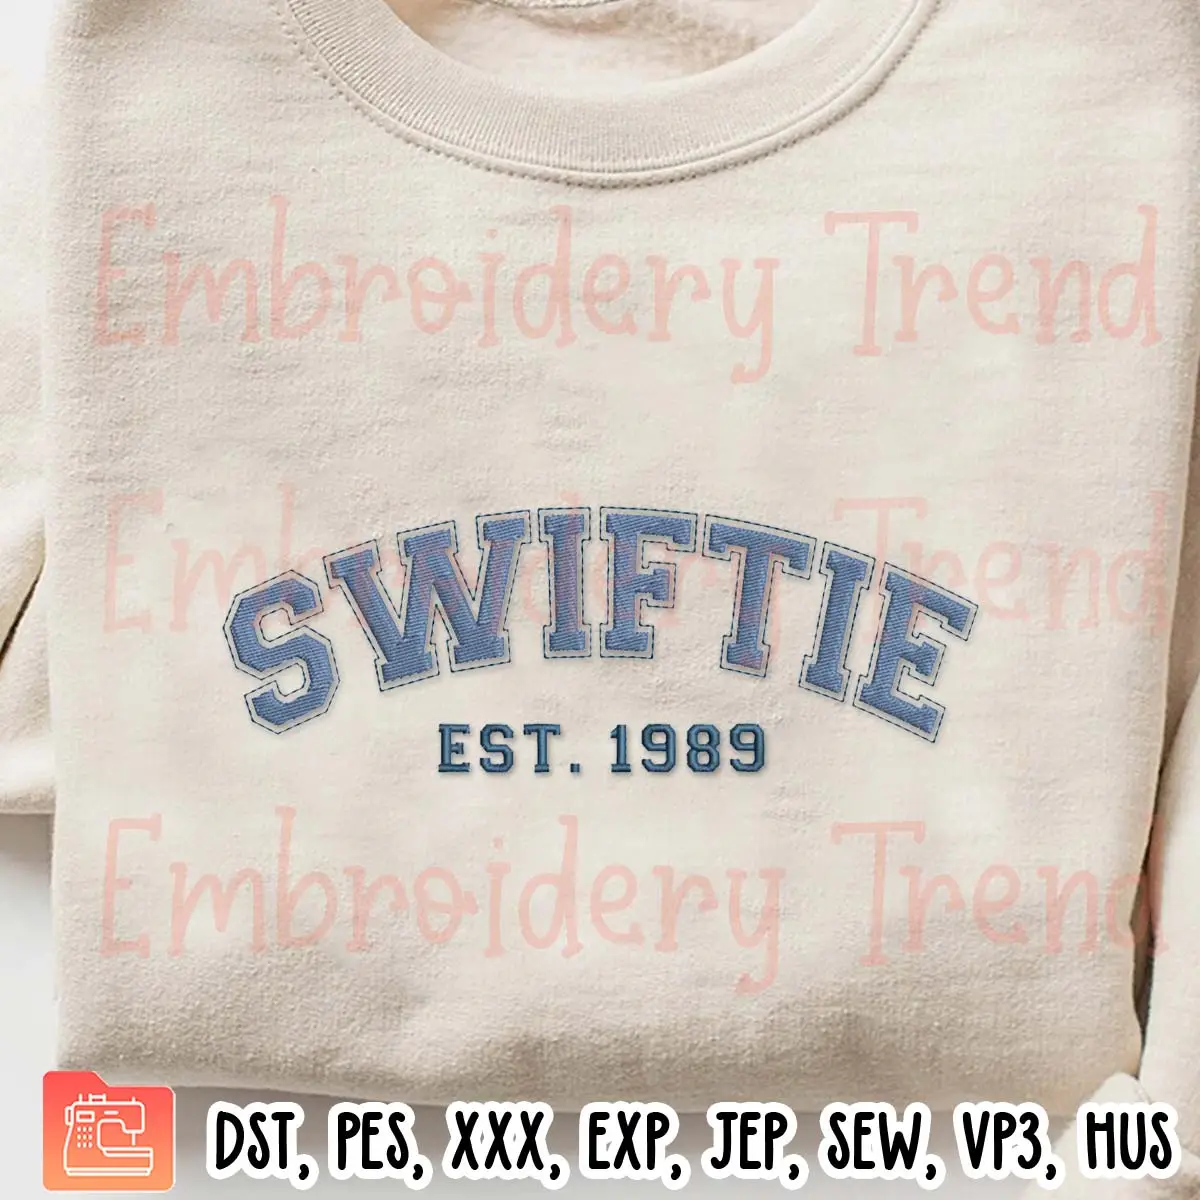 Swiftie Est 1989 Embroidery Design, Taylor Swift Gifts Fans Embroidery Digitizing Pes File